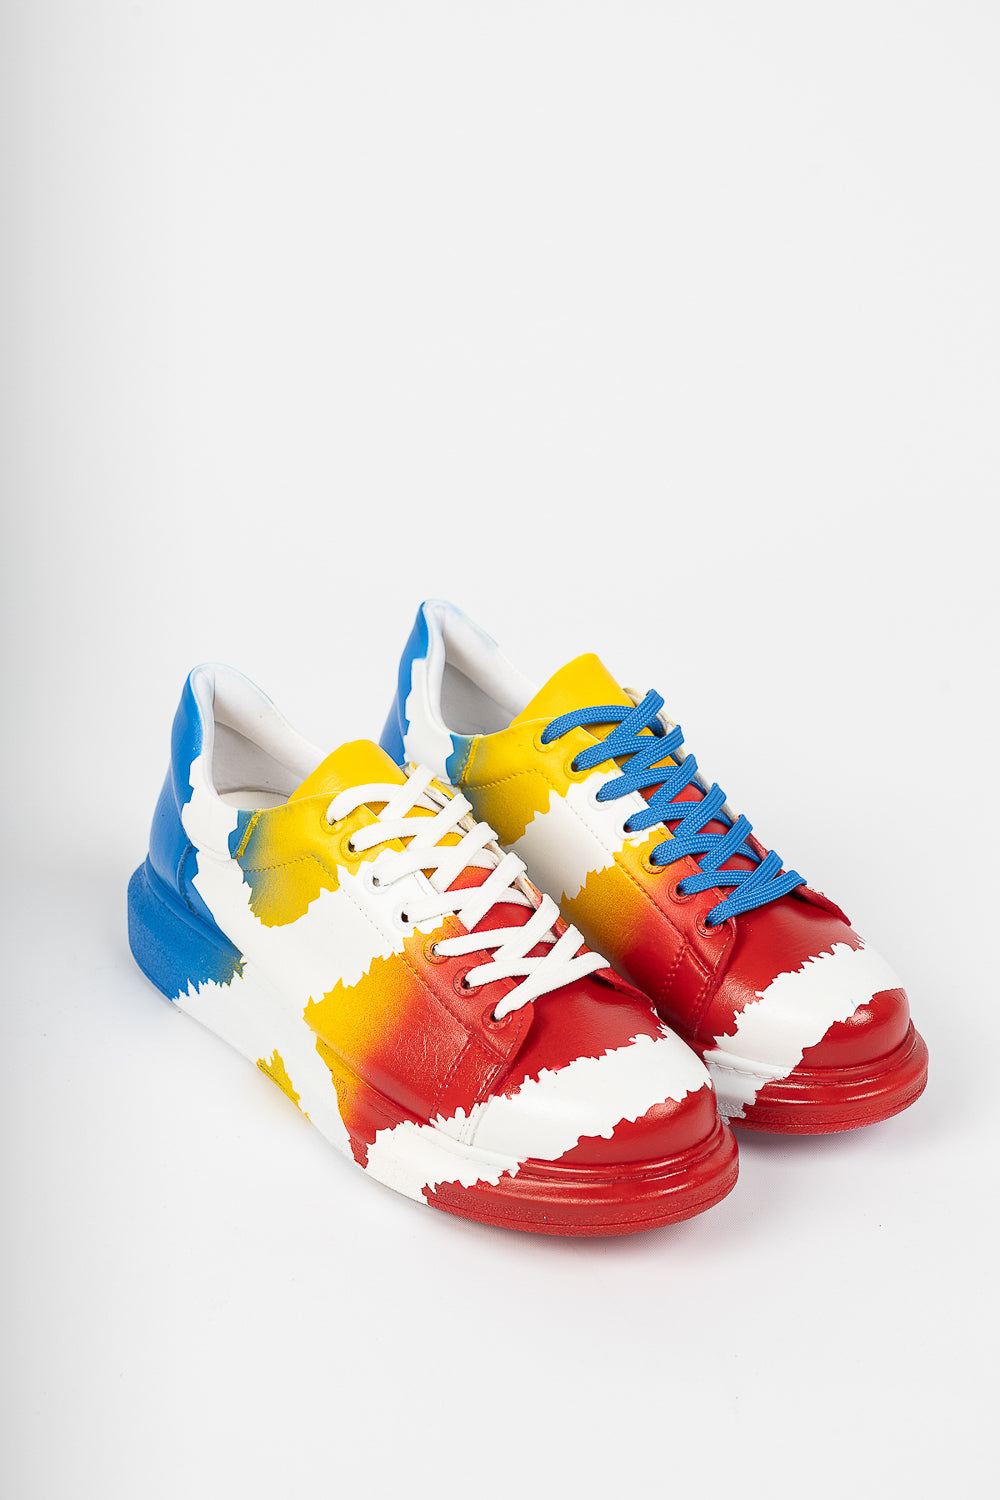 3Color X - Swagg Splash Sneakers